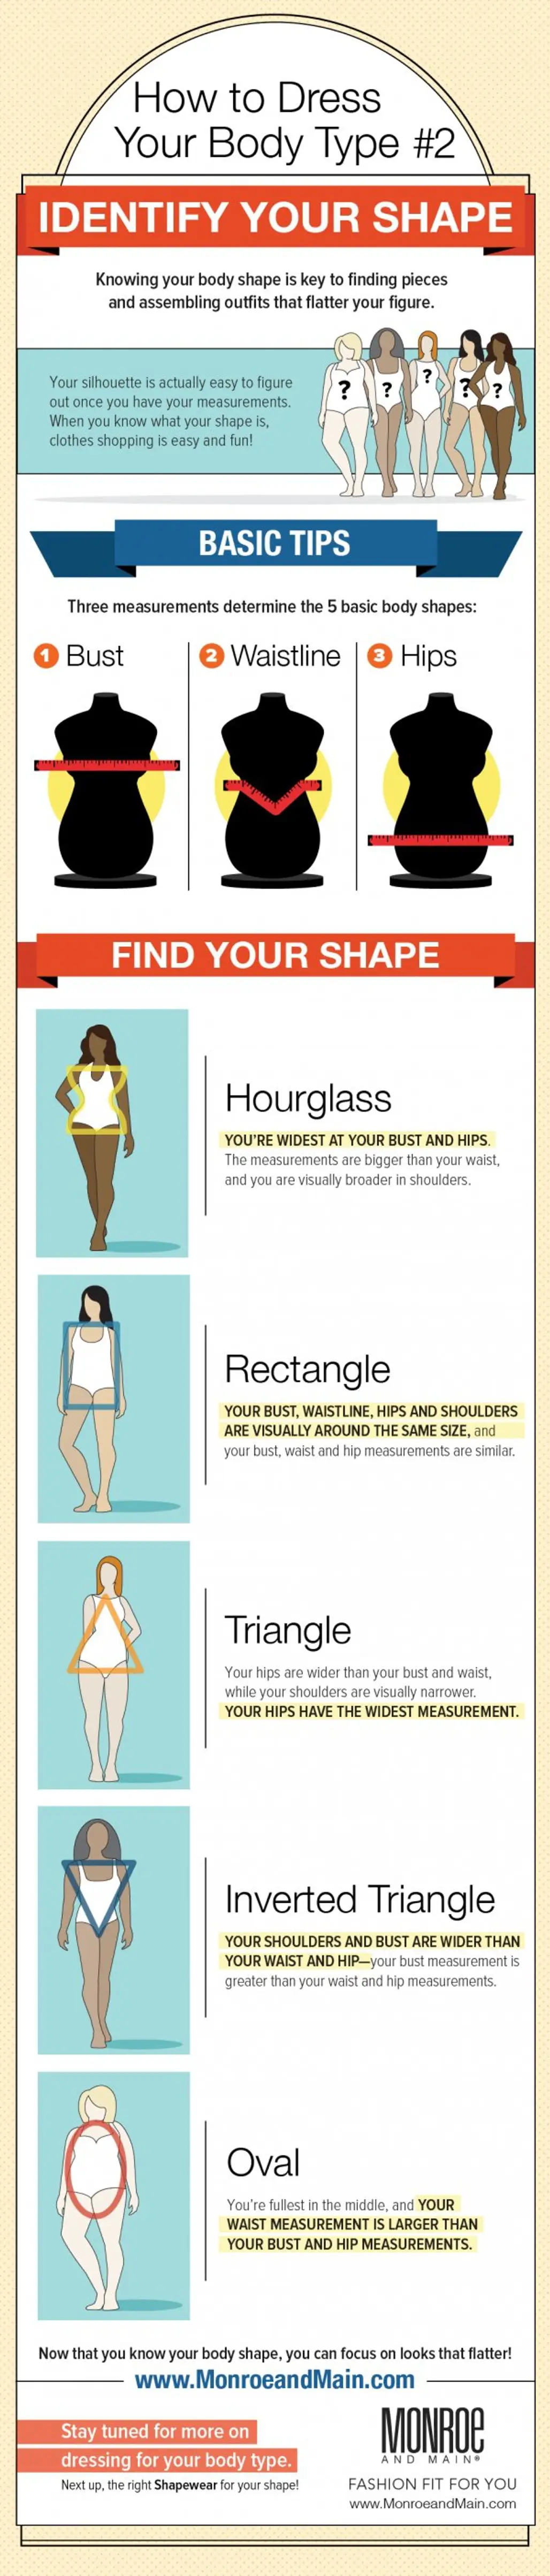 Dressing for Your Body Shape